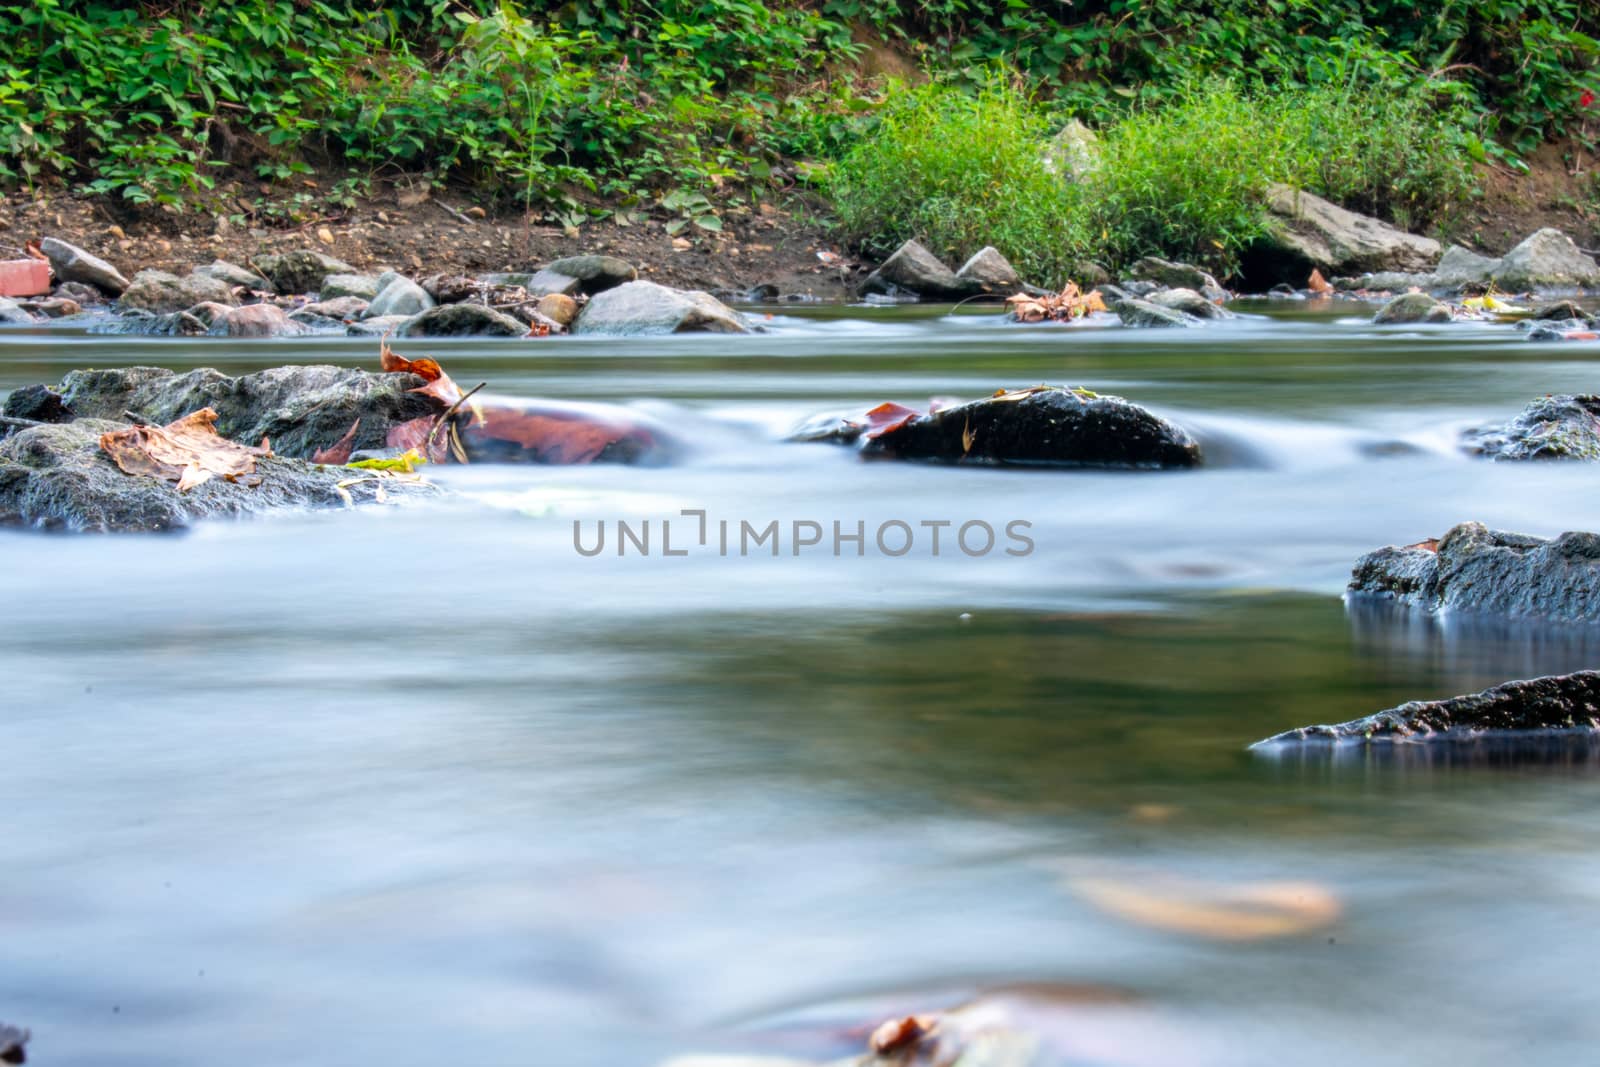 A Low Angle Long Exposure Of a Stream Full of Multicolored Rocks by bju12290